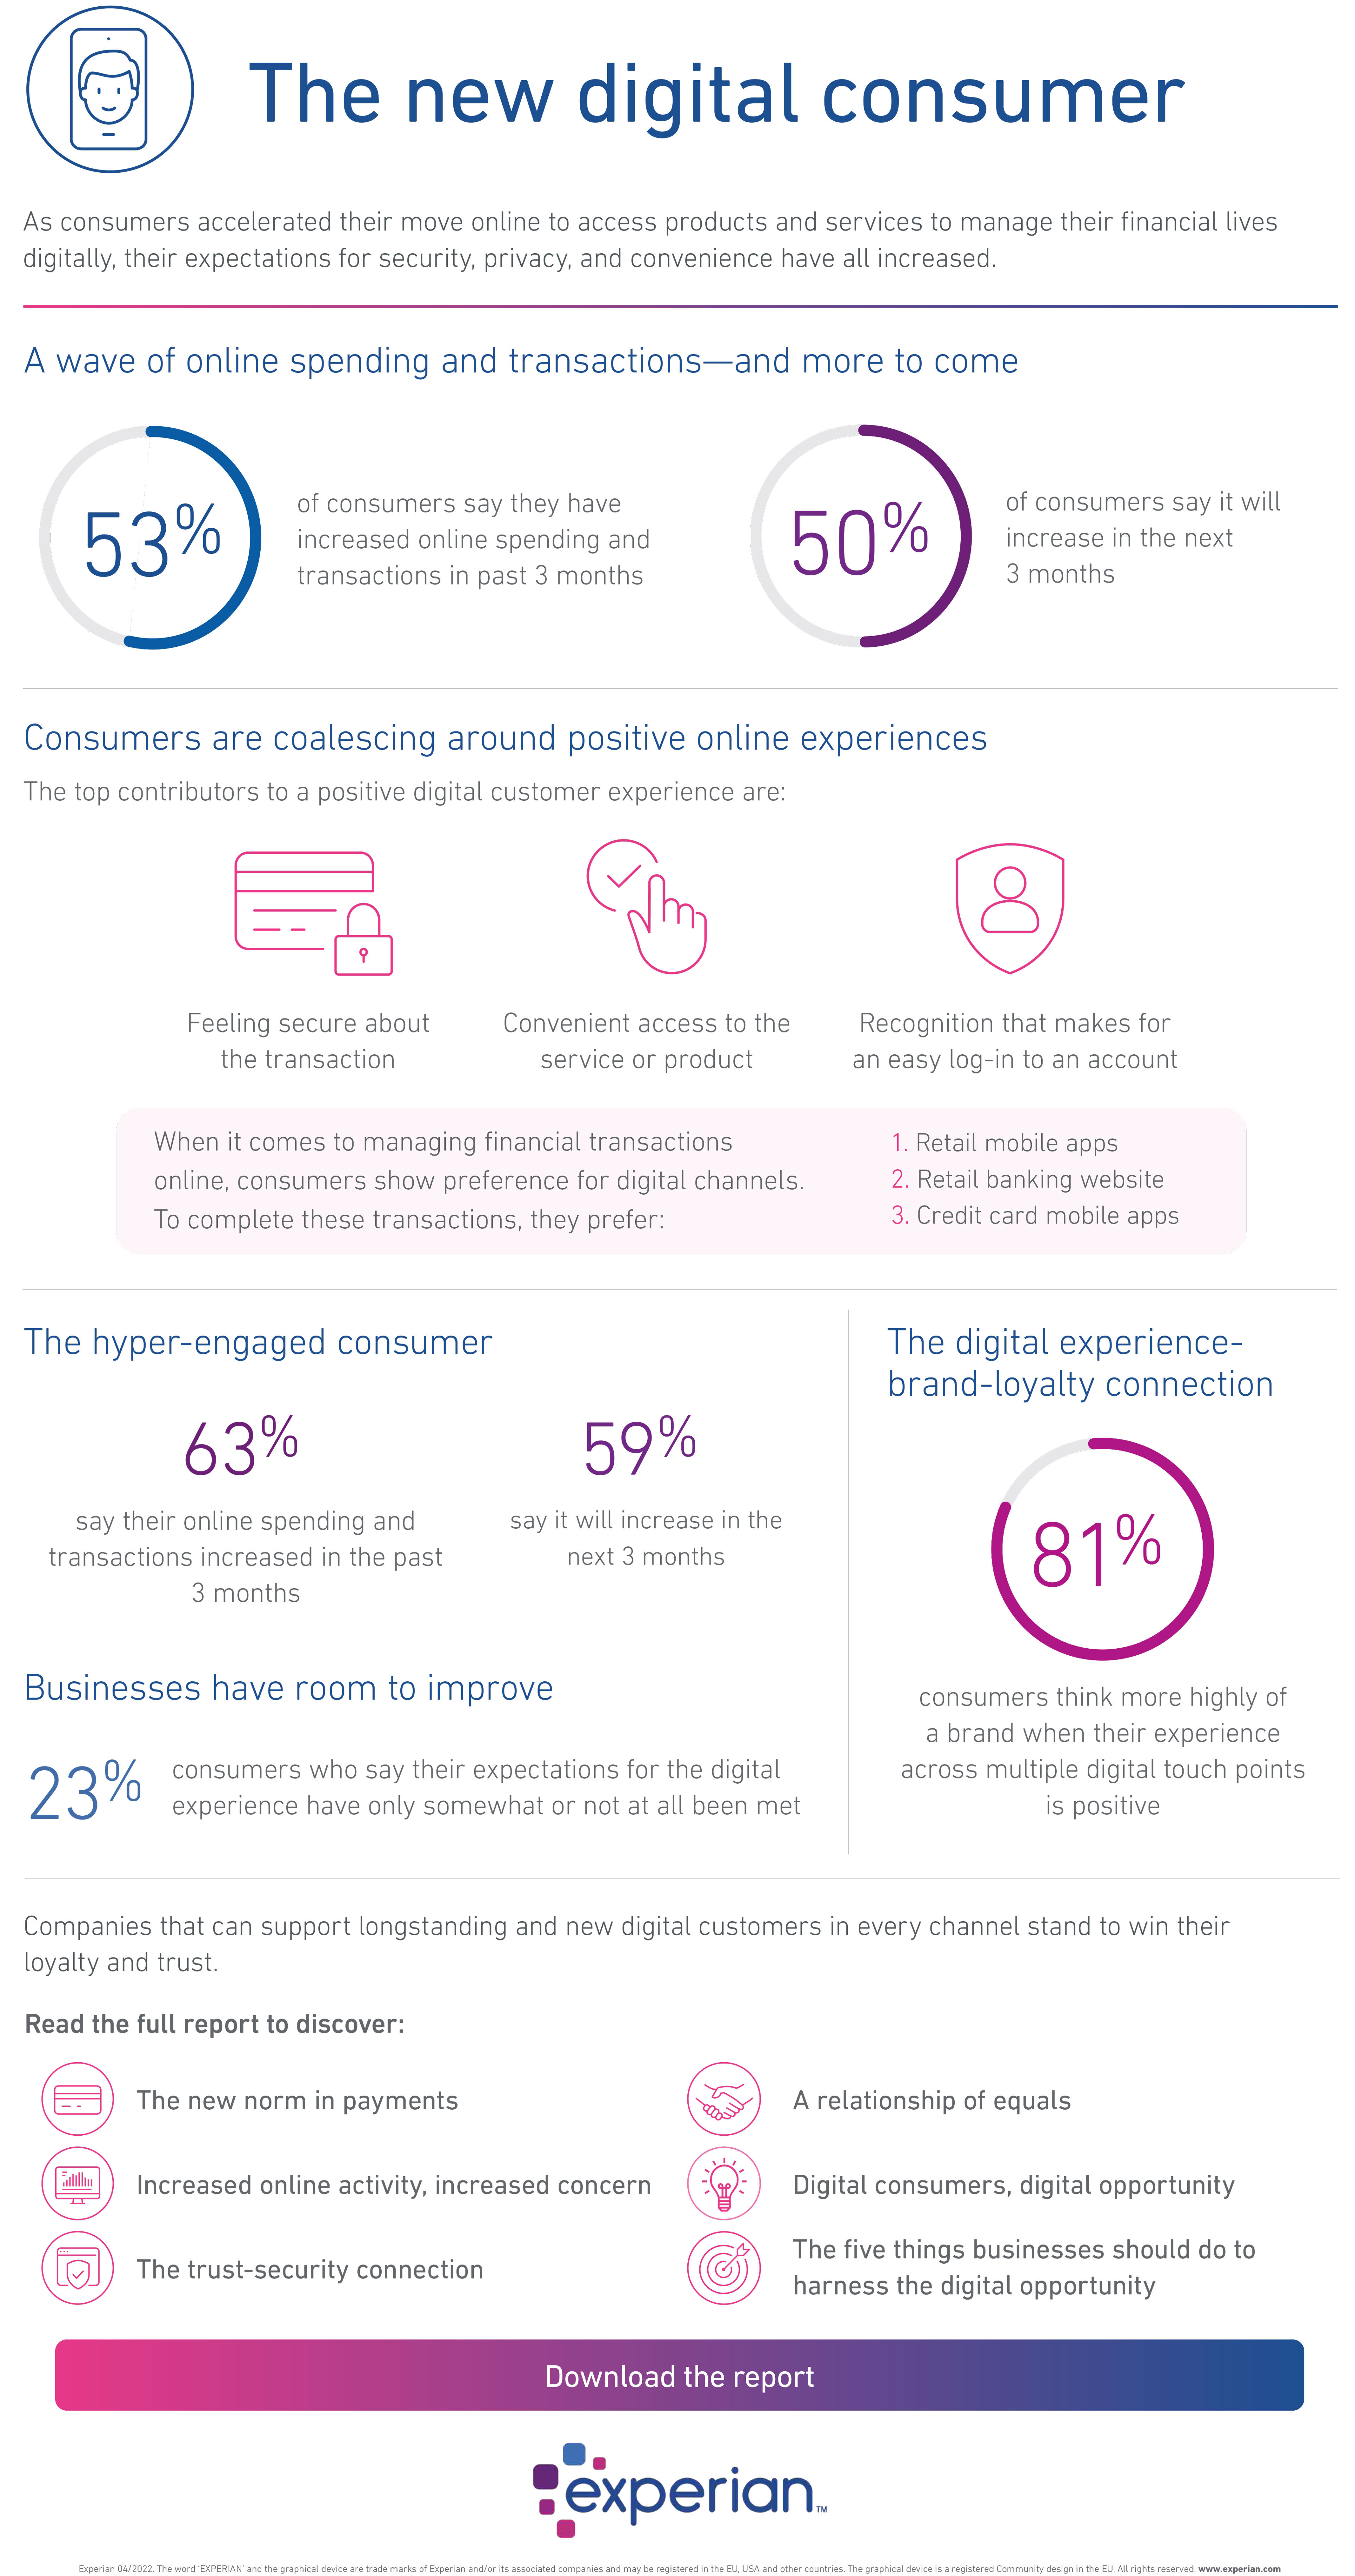 What makes a positive digital experience for consumers? - Global Insights